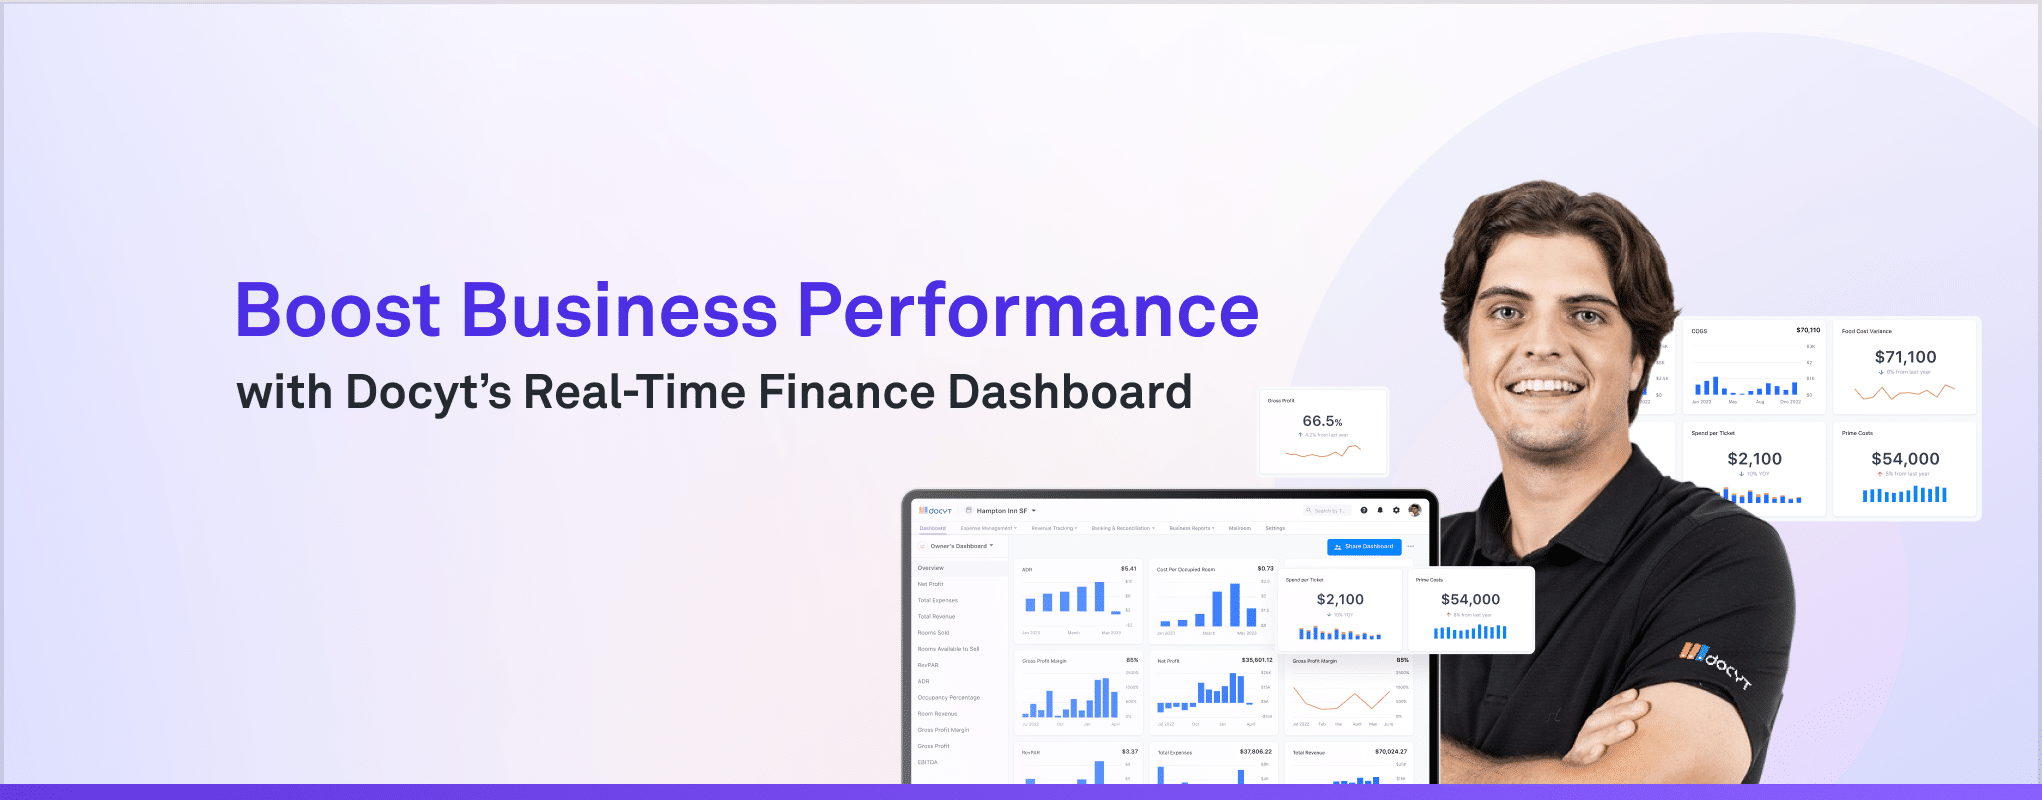 introducing-docyts-financial-insights-dashboard-live-kpis-metrics